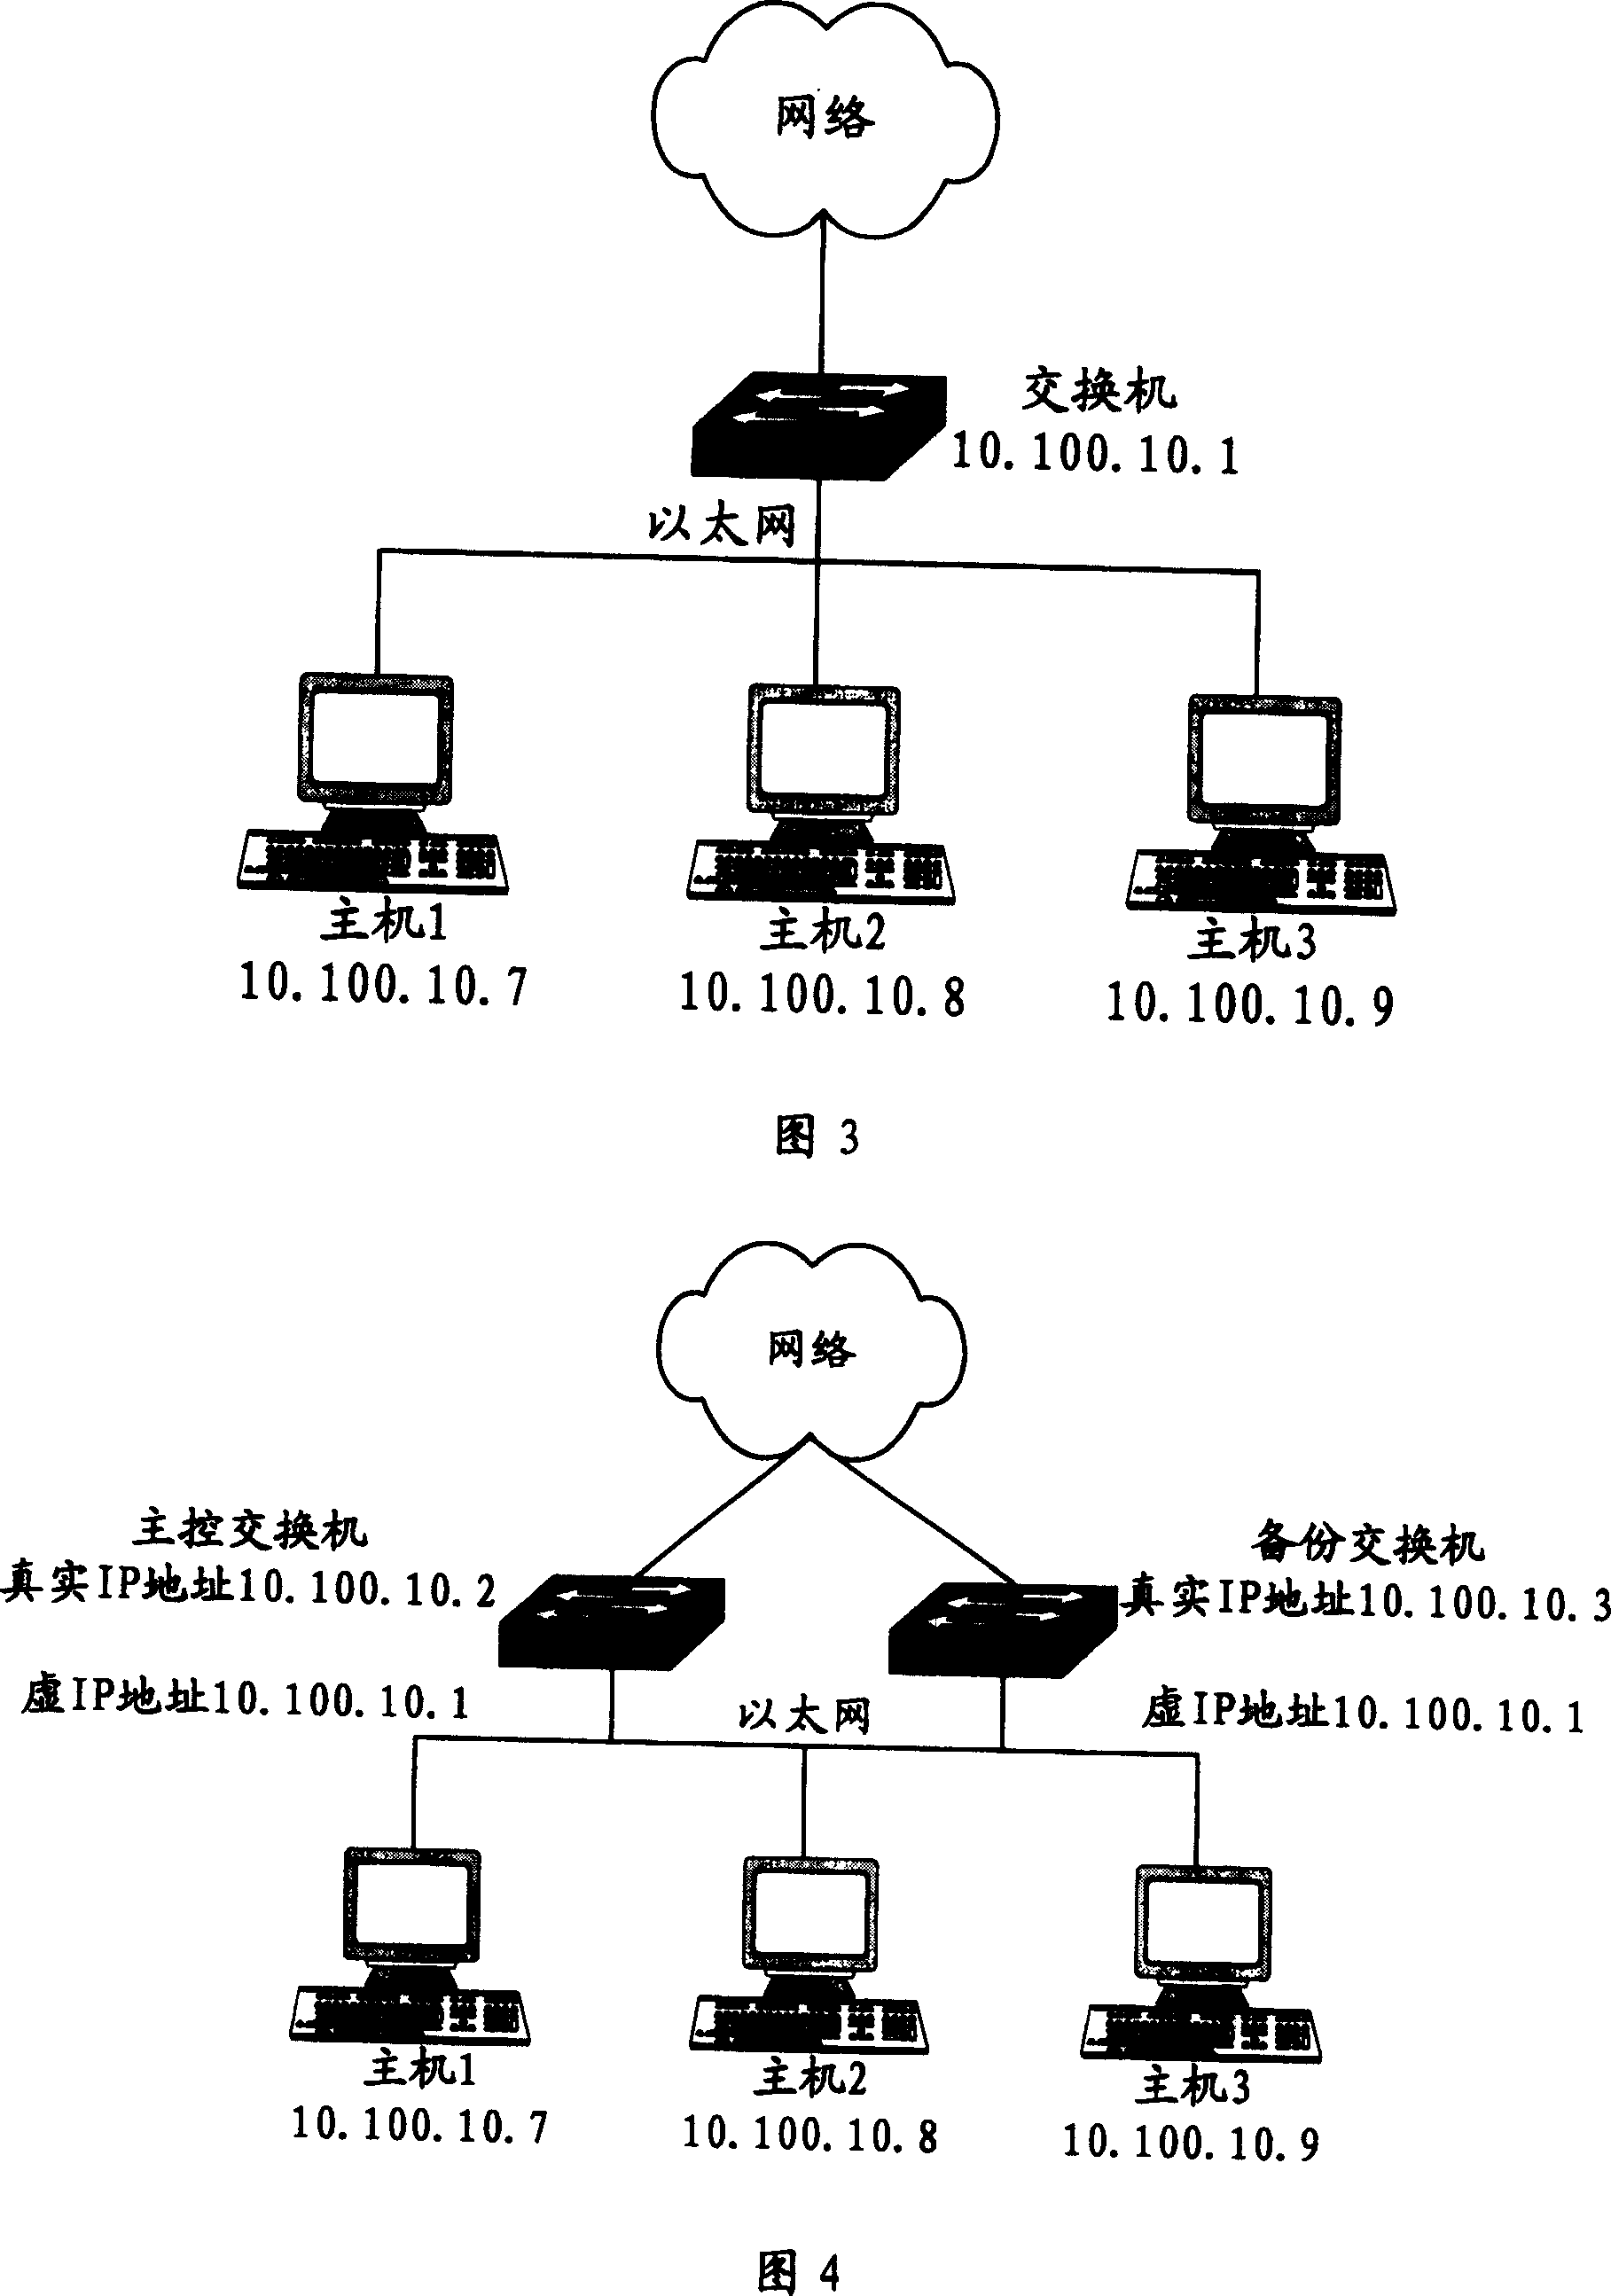 Method for realizing backup and load shared equally based on proxy of address resolution protocol